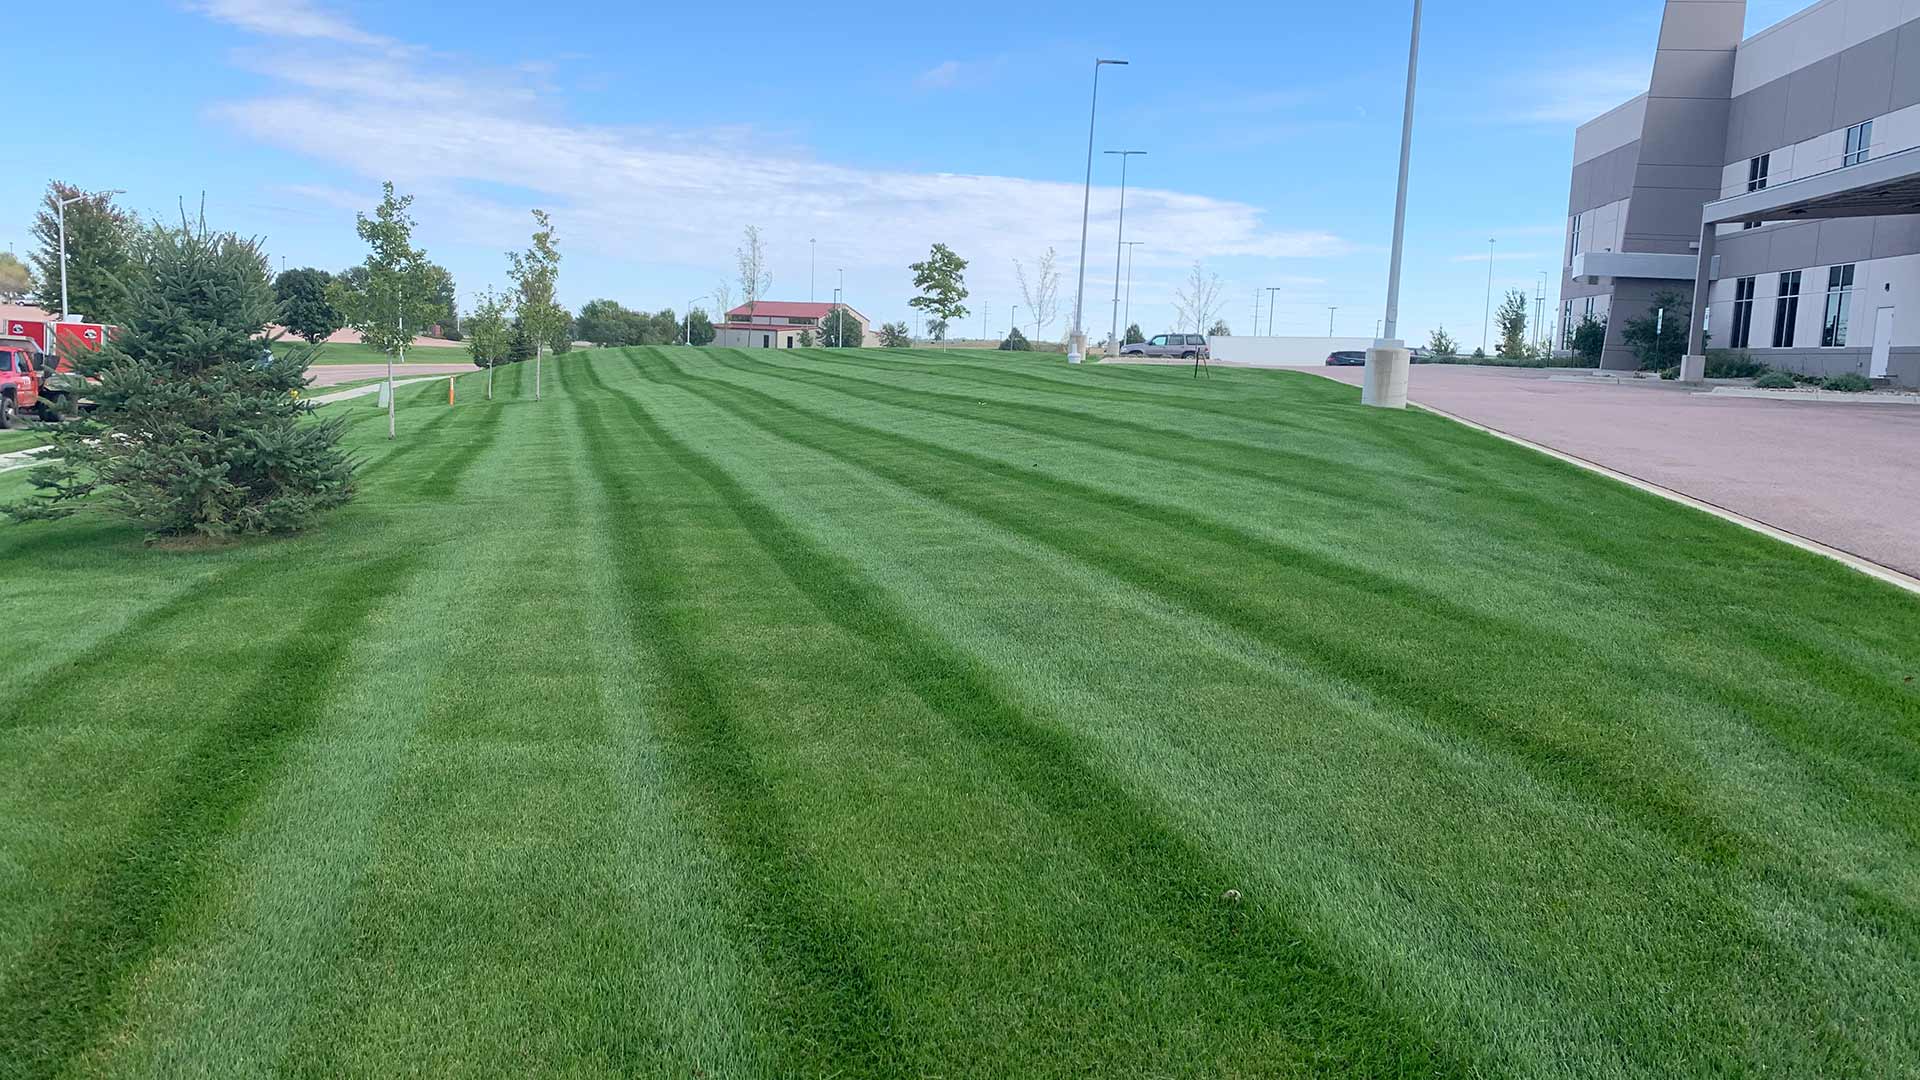 Large lawn with perfect mowing lines near Sioux Falls, SD.